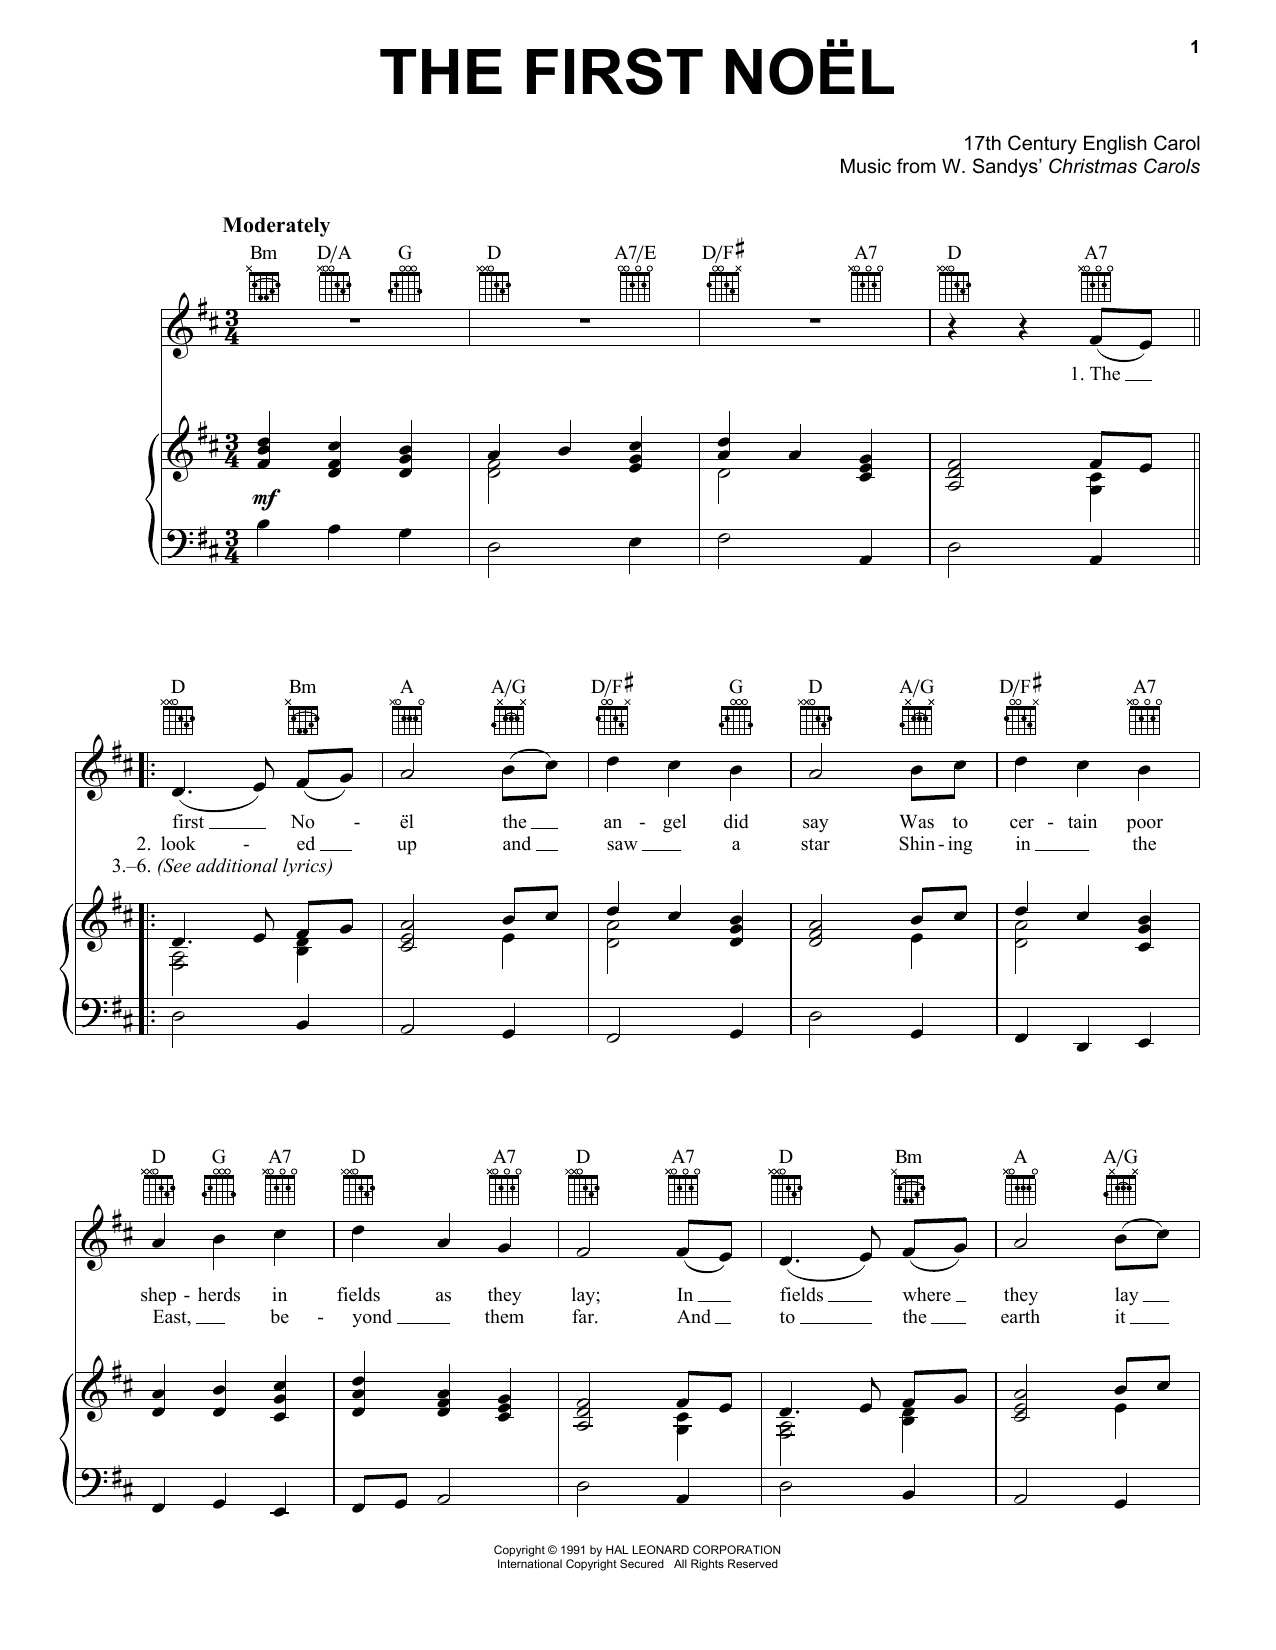 Christmas Carol The First Noel sheet music notes and chords. Download Printable PDF.